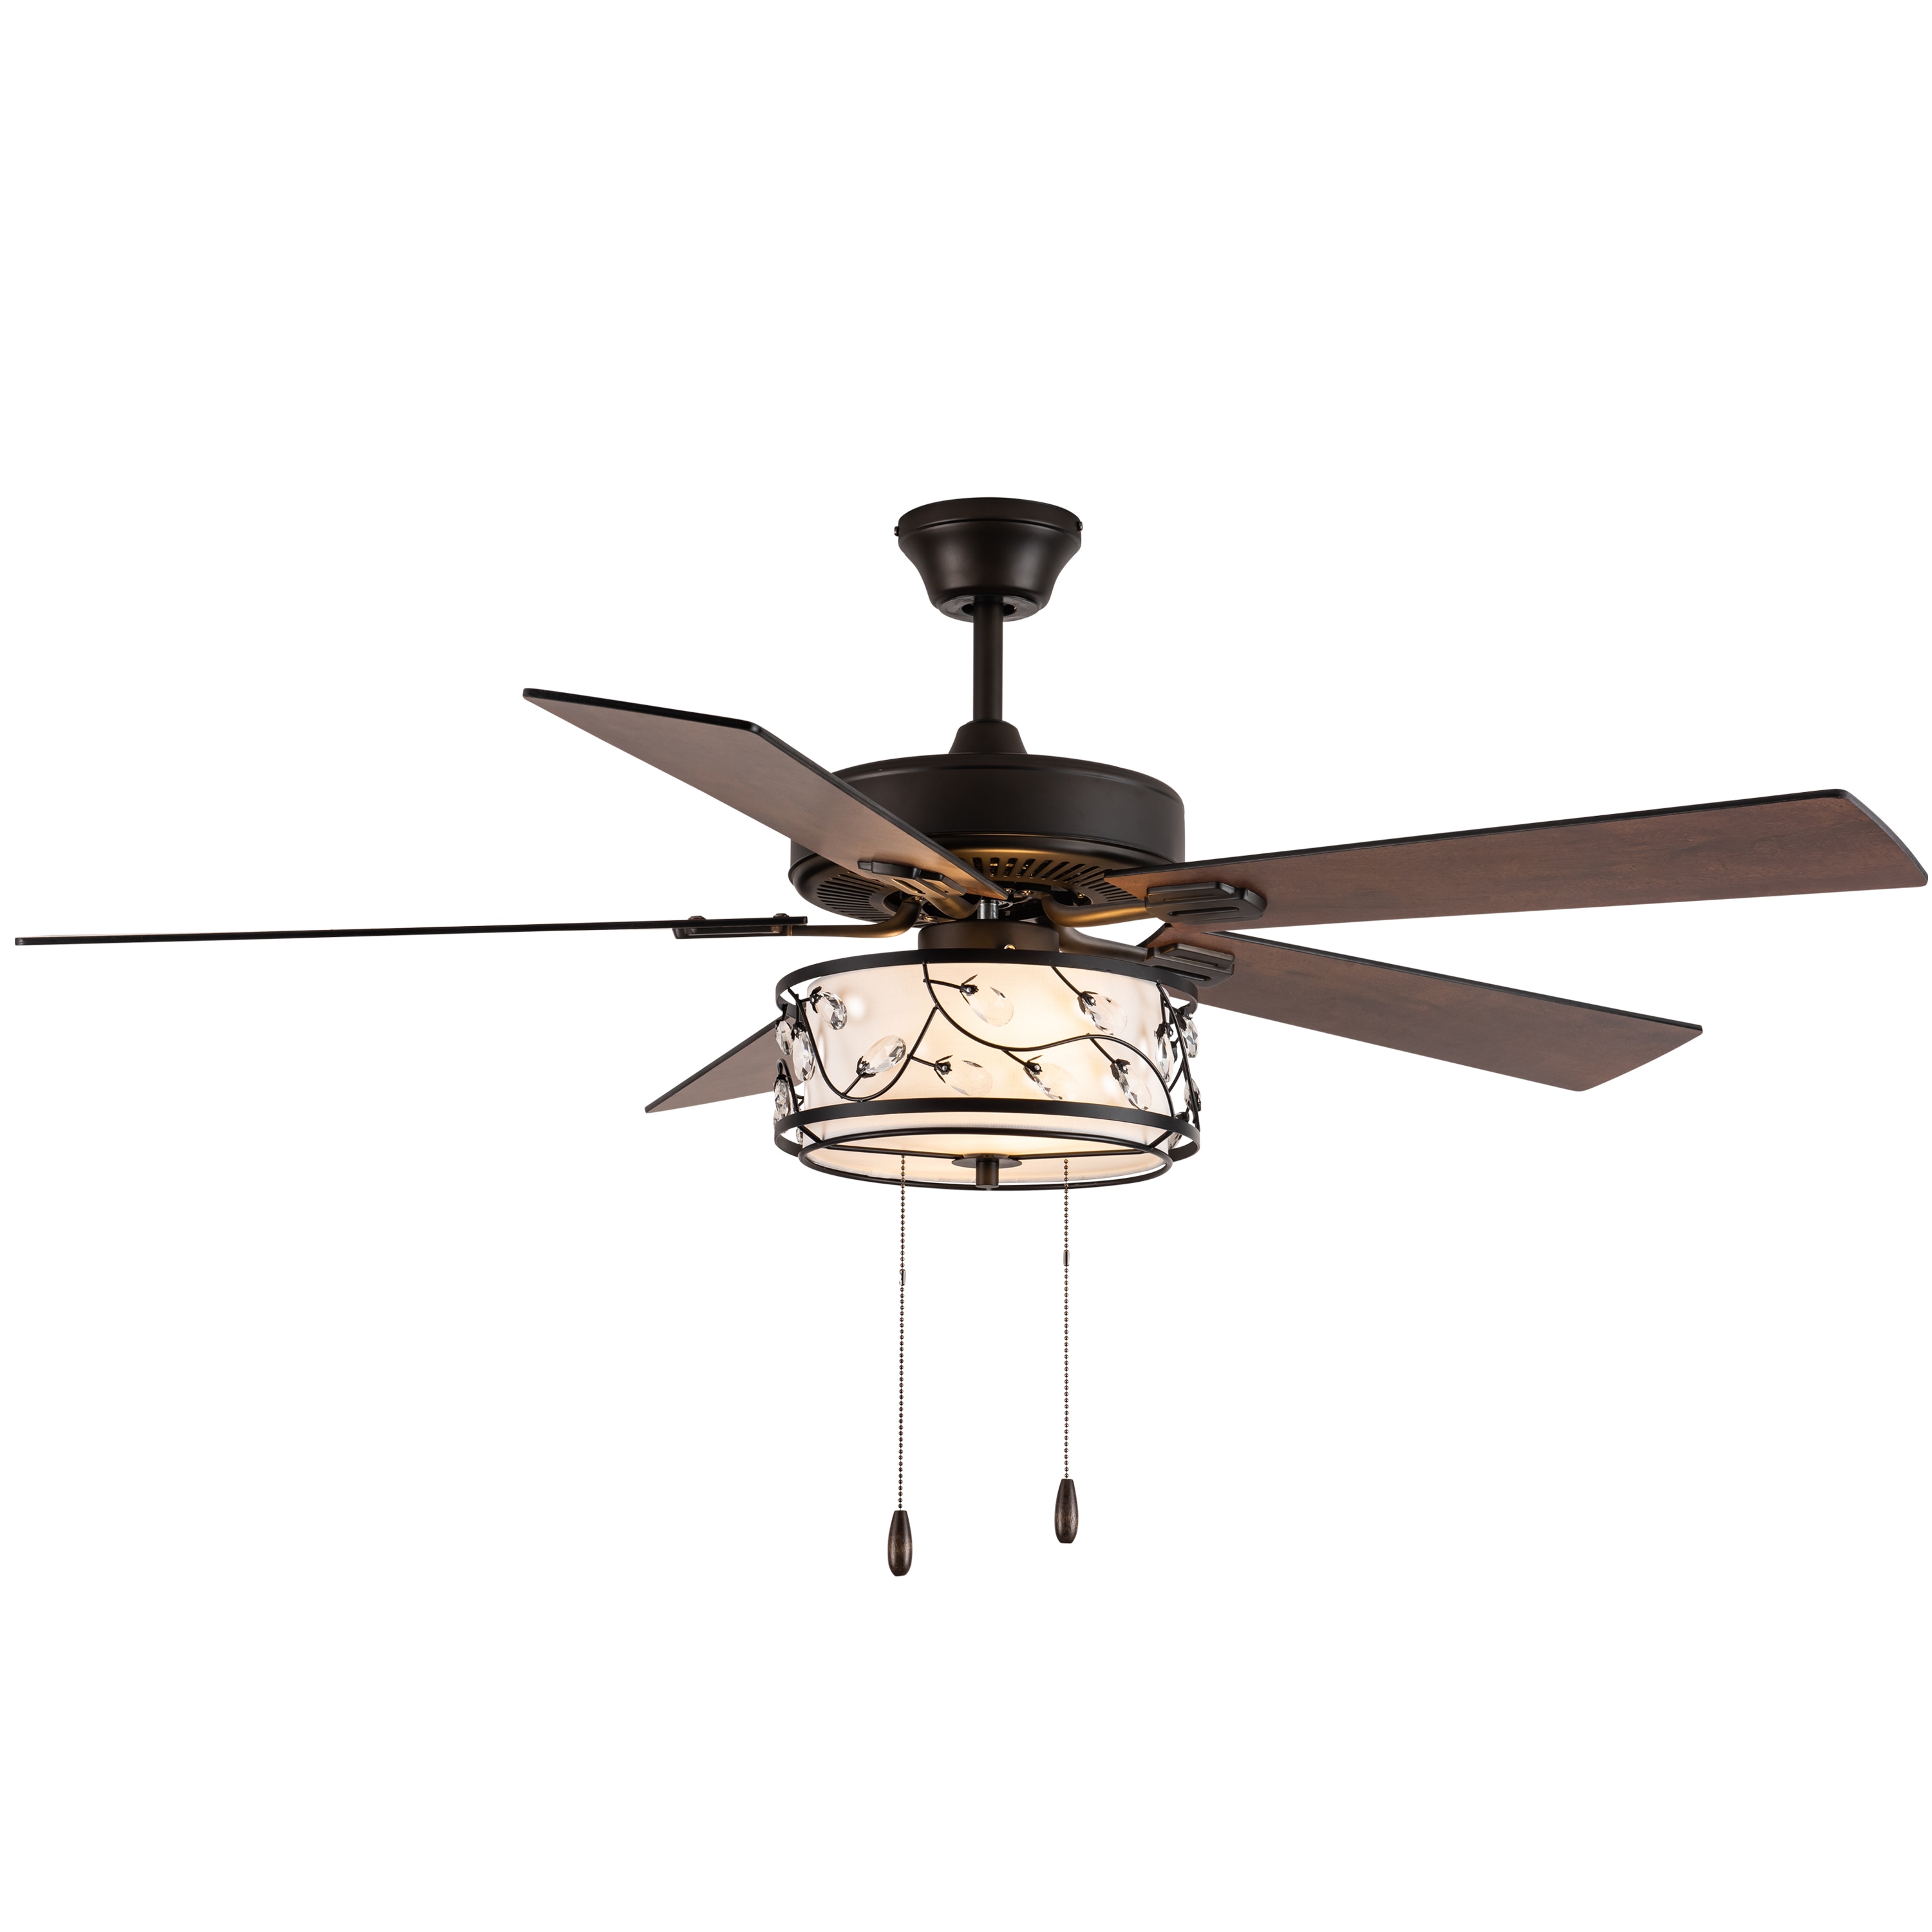 Hampton Bay Ceiling Fan With Light 2 Lights 5 Blades A19 in Natural Iron for sale online 